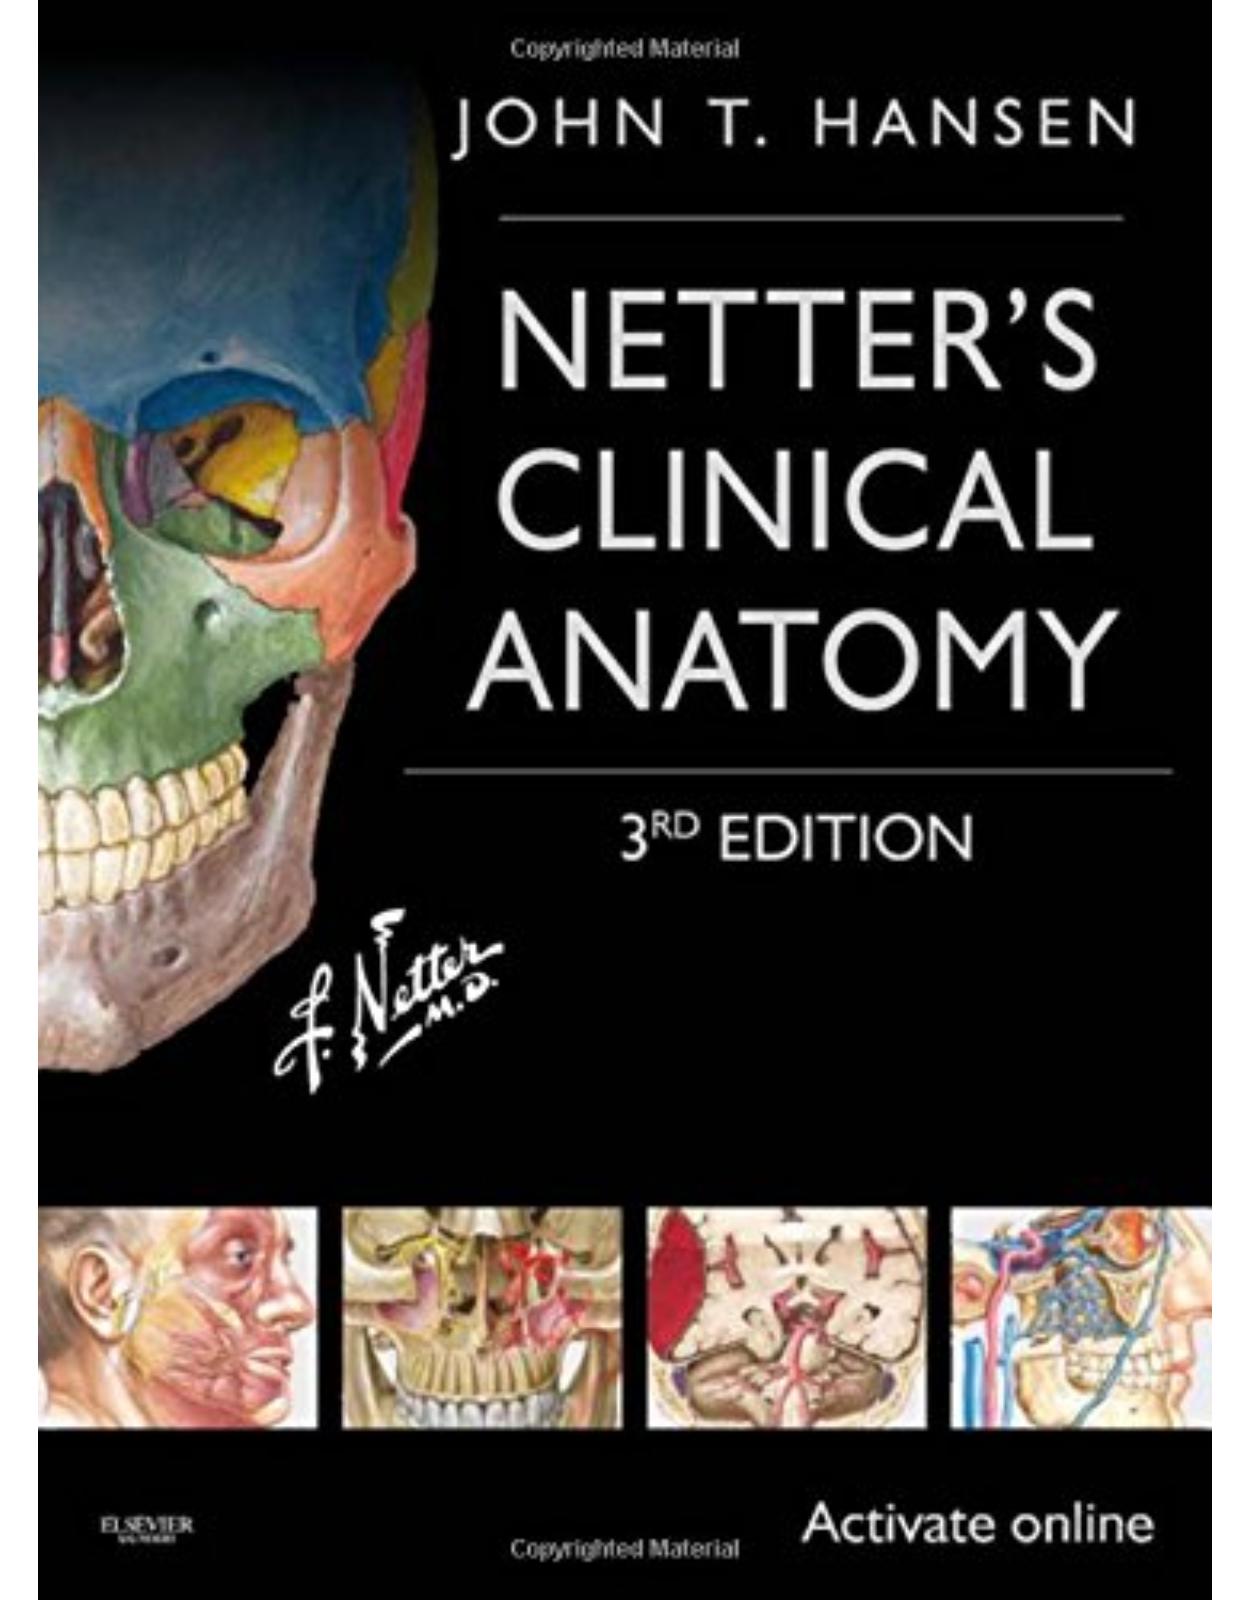 Netter's Clinical Anatomy, 3rd Edition